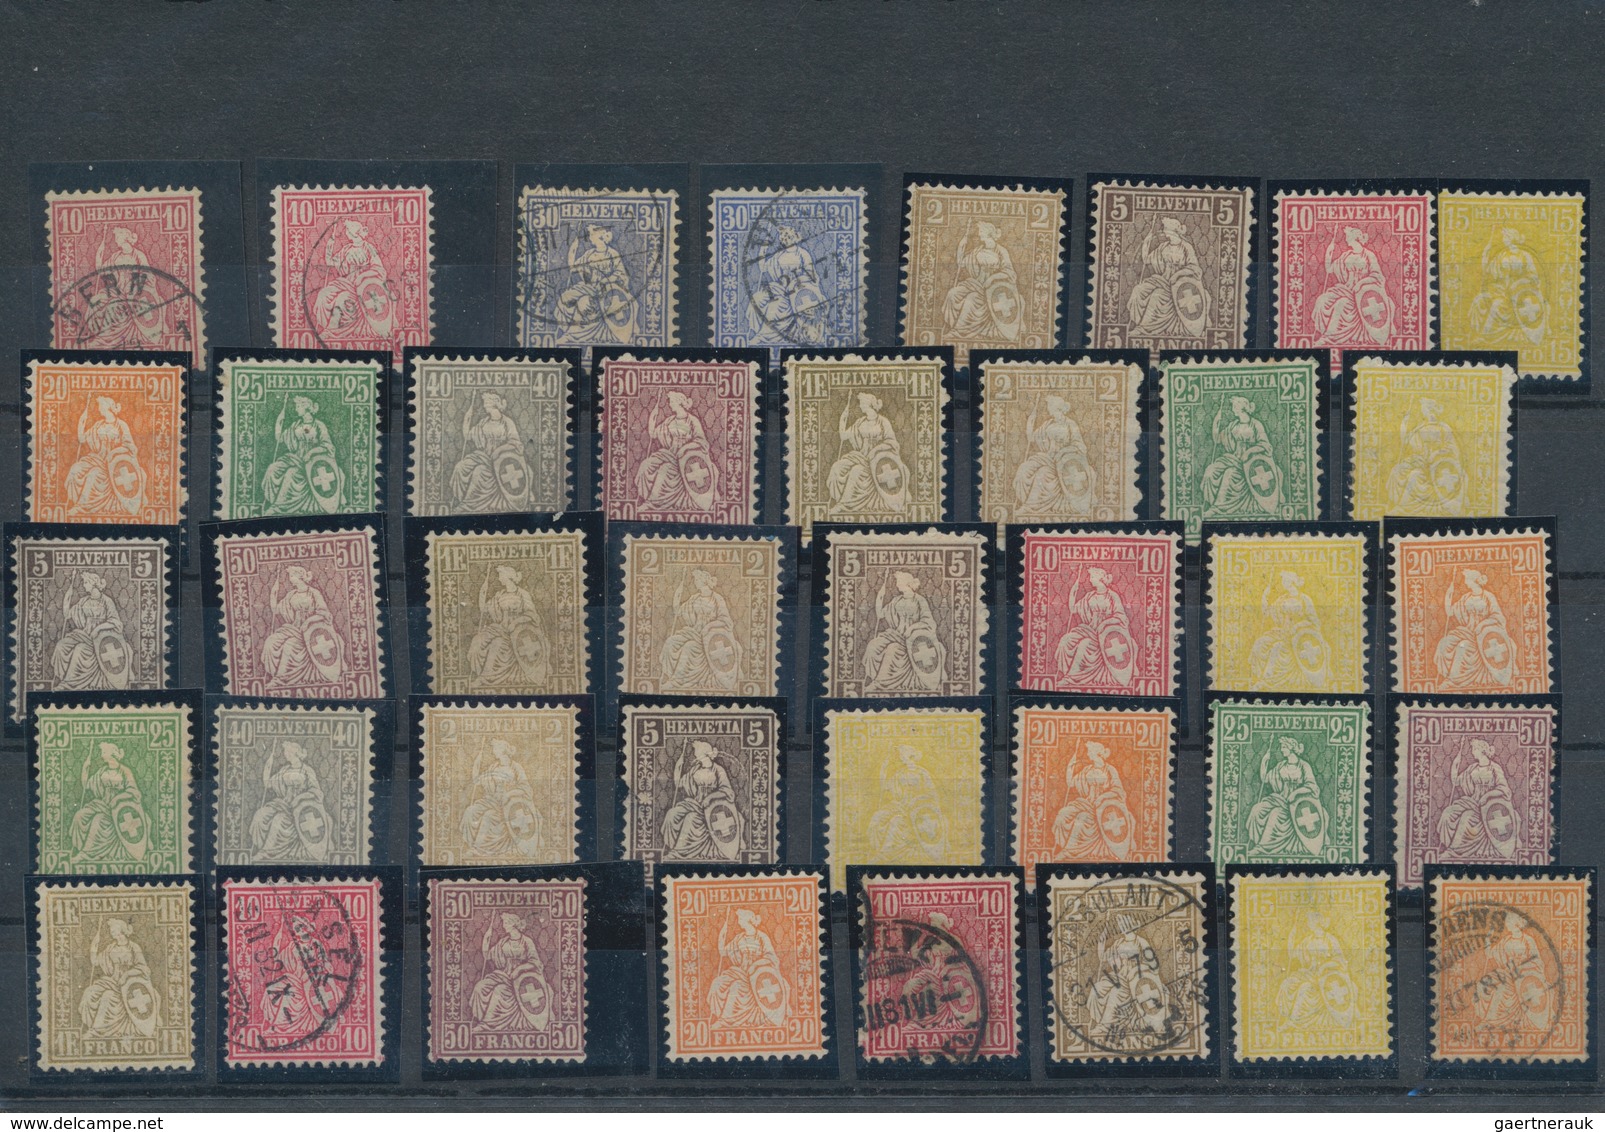 Schweiz: 1850-1930 Ca., Small Collection On Cards Starting Imperf Issues In Different Types, Most Fi - Lotes/Colecciones